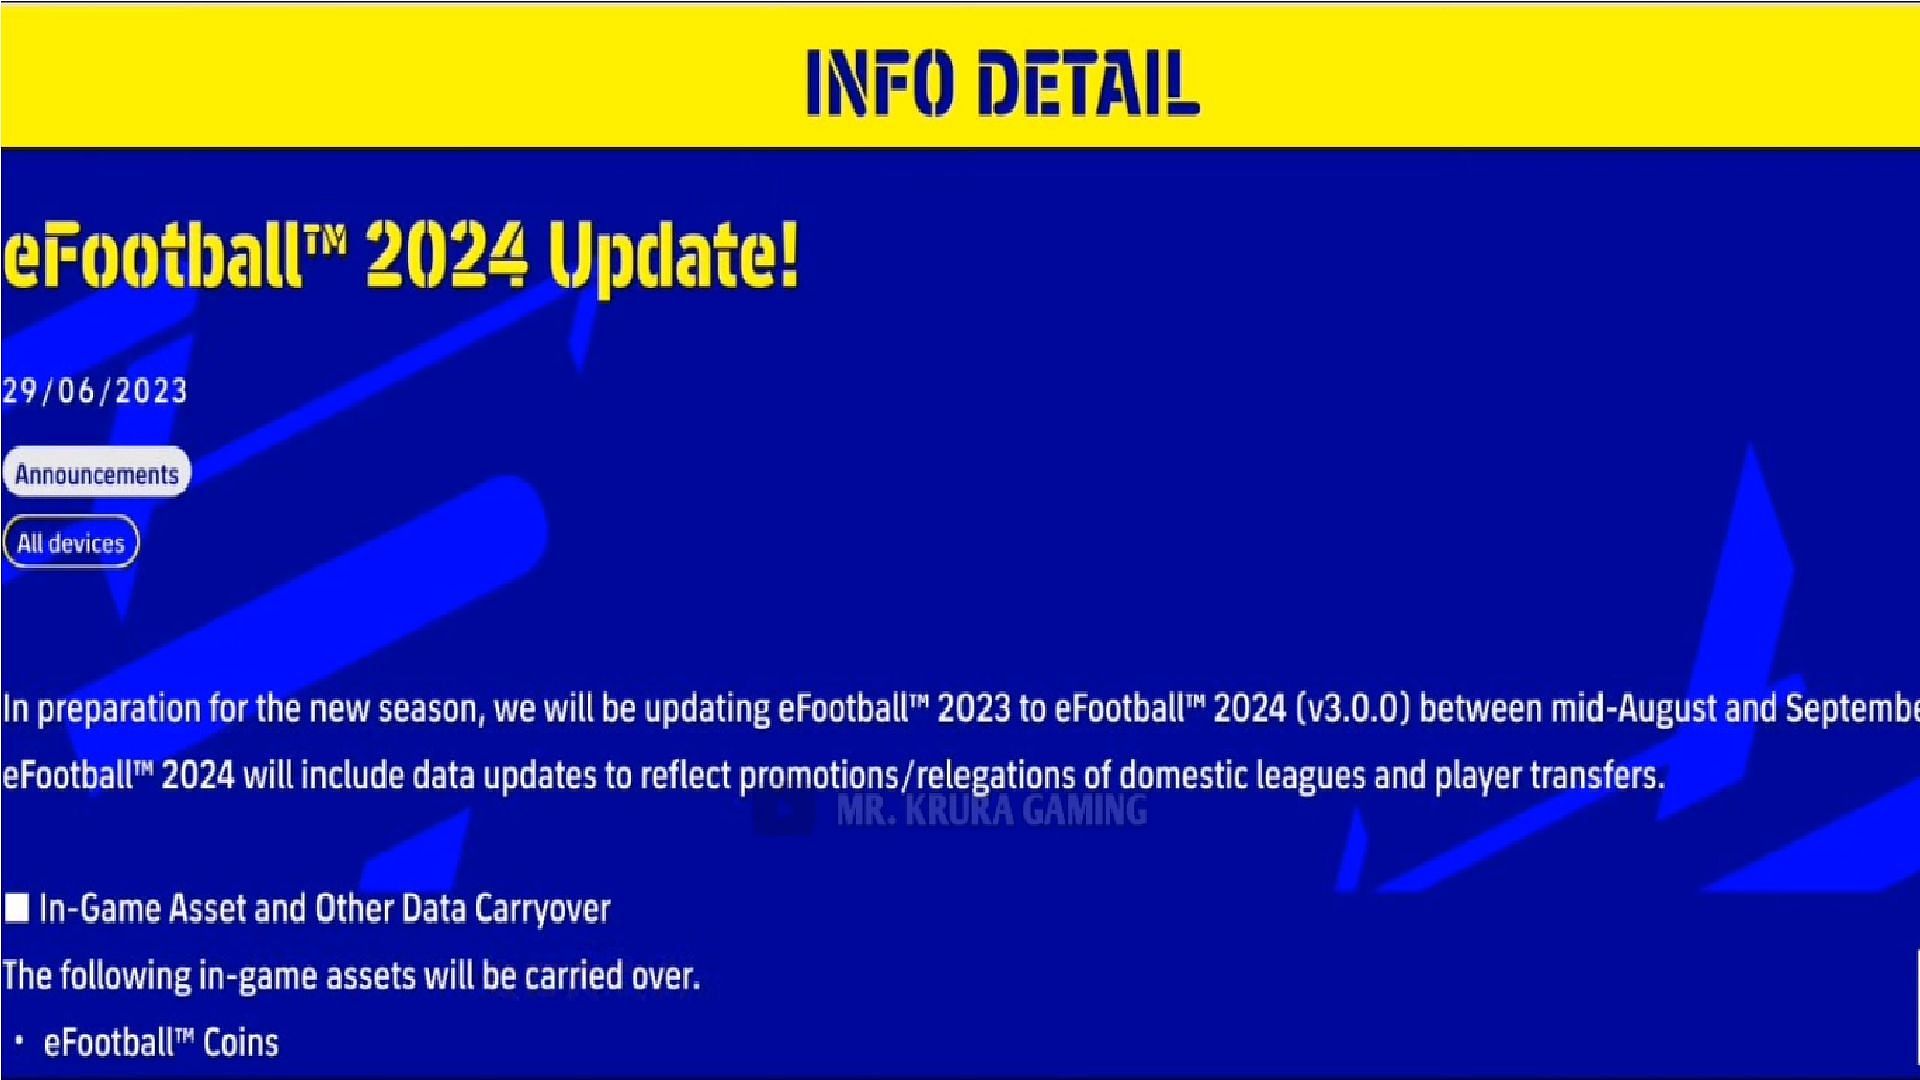 eFootball 2024 Release Date - When the Update will be Released?